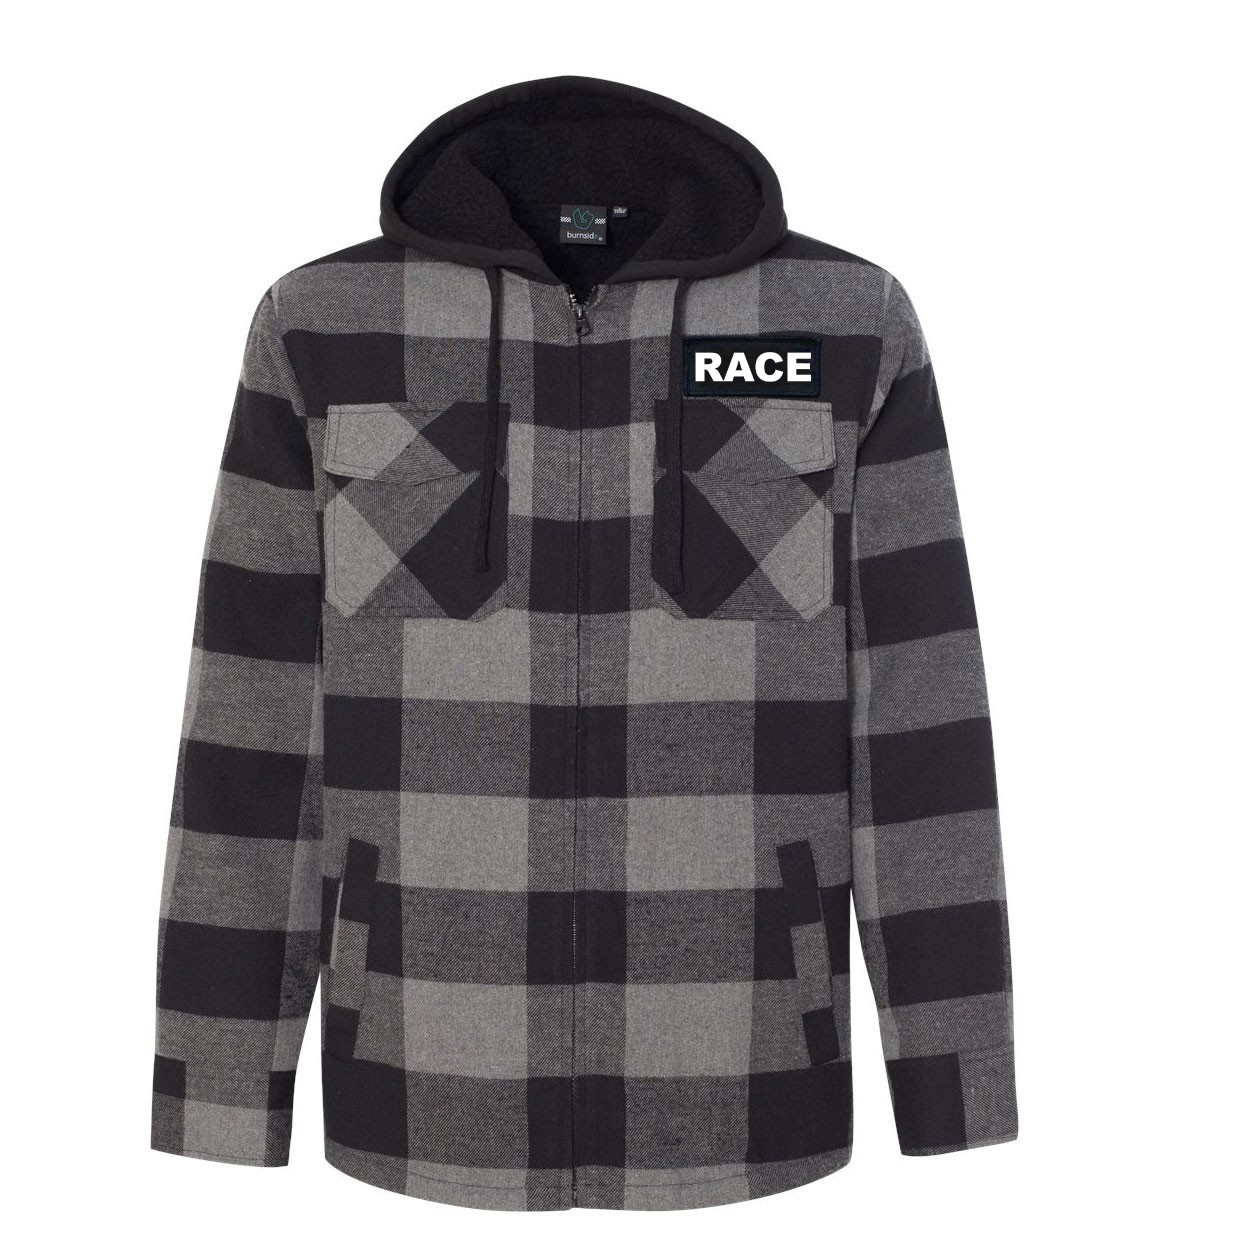 Race Brand Logo Classic Unisex Full Zip Woven Patch Hooded Flannel Jacket Black/Gray